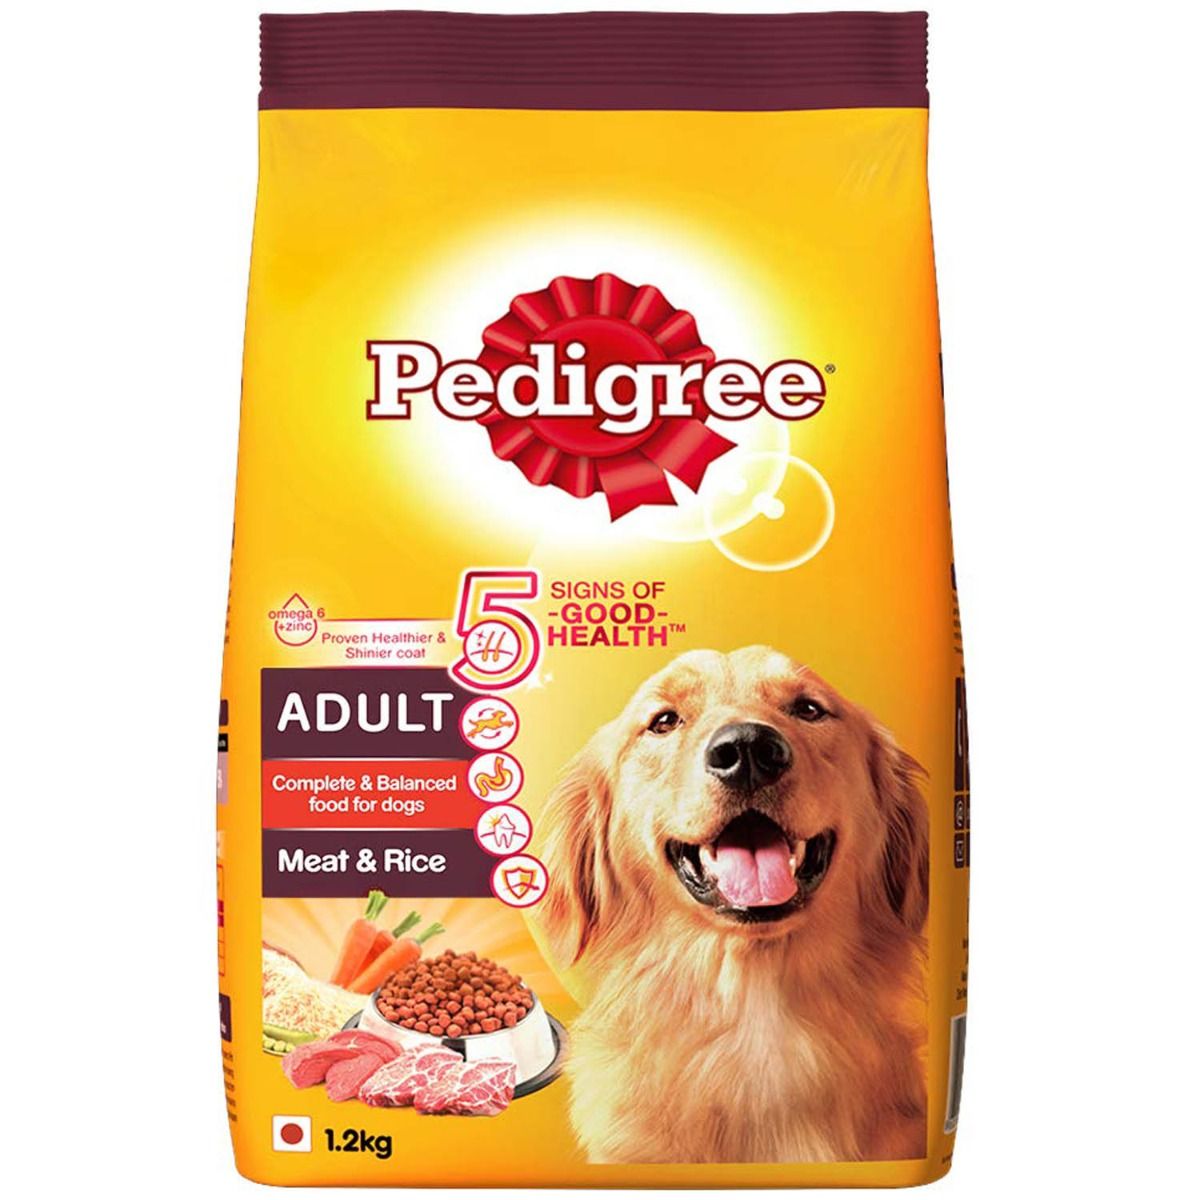 Pedigree Adult Dog Food With Meat & Rice, 1.2 kg, Pack of 1 